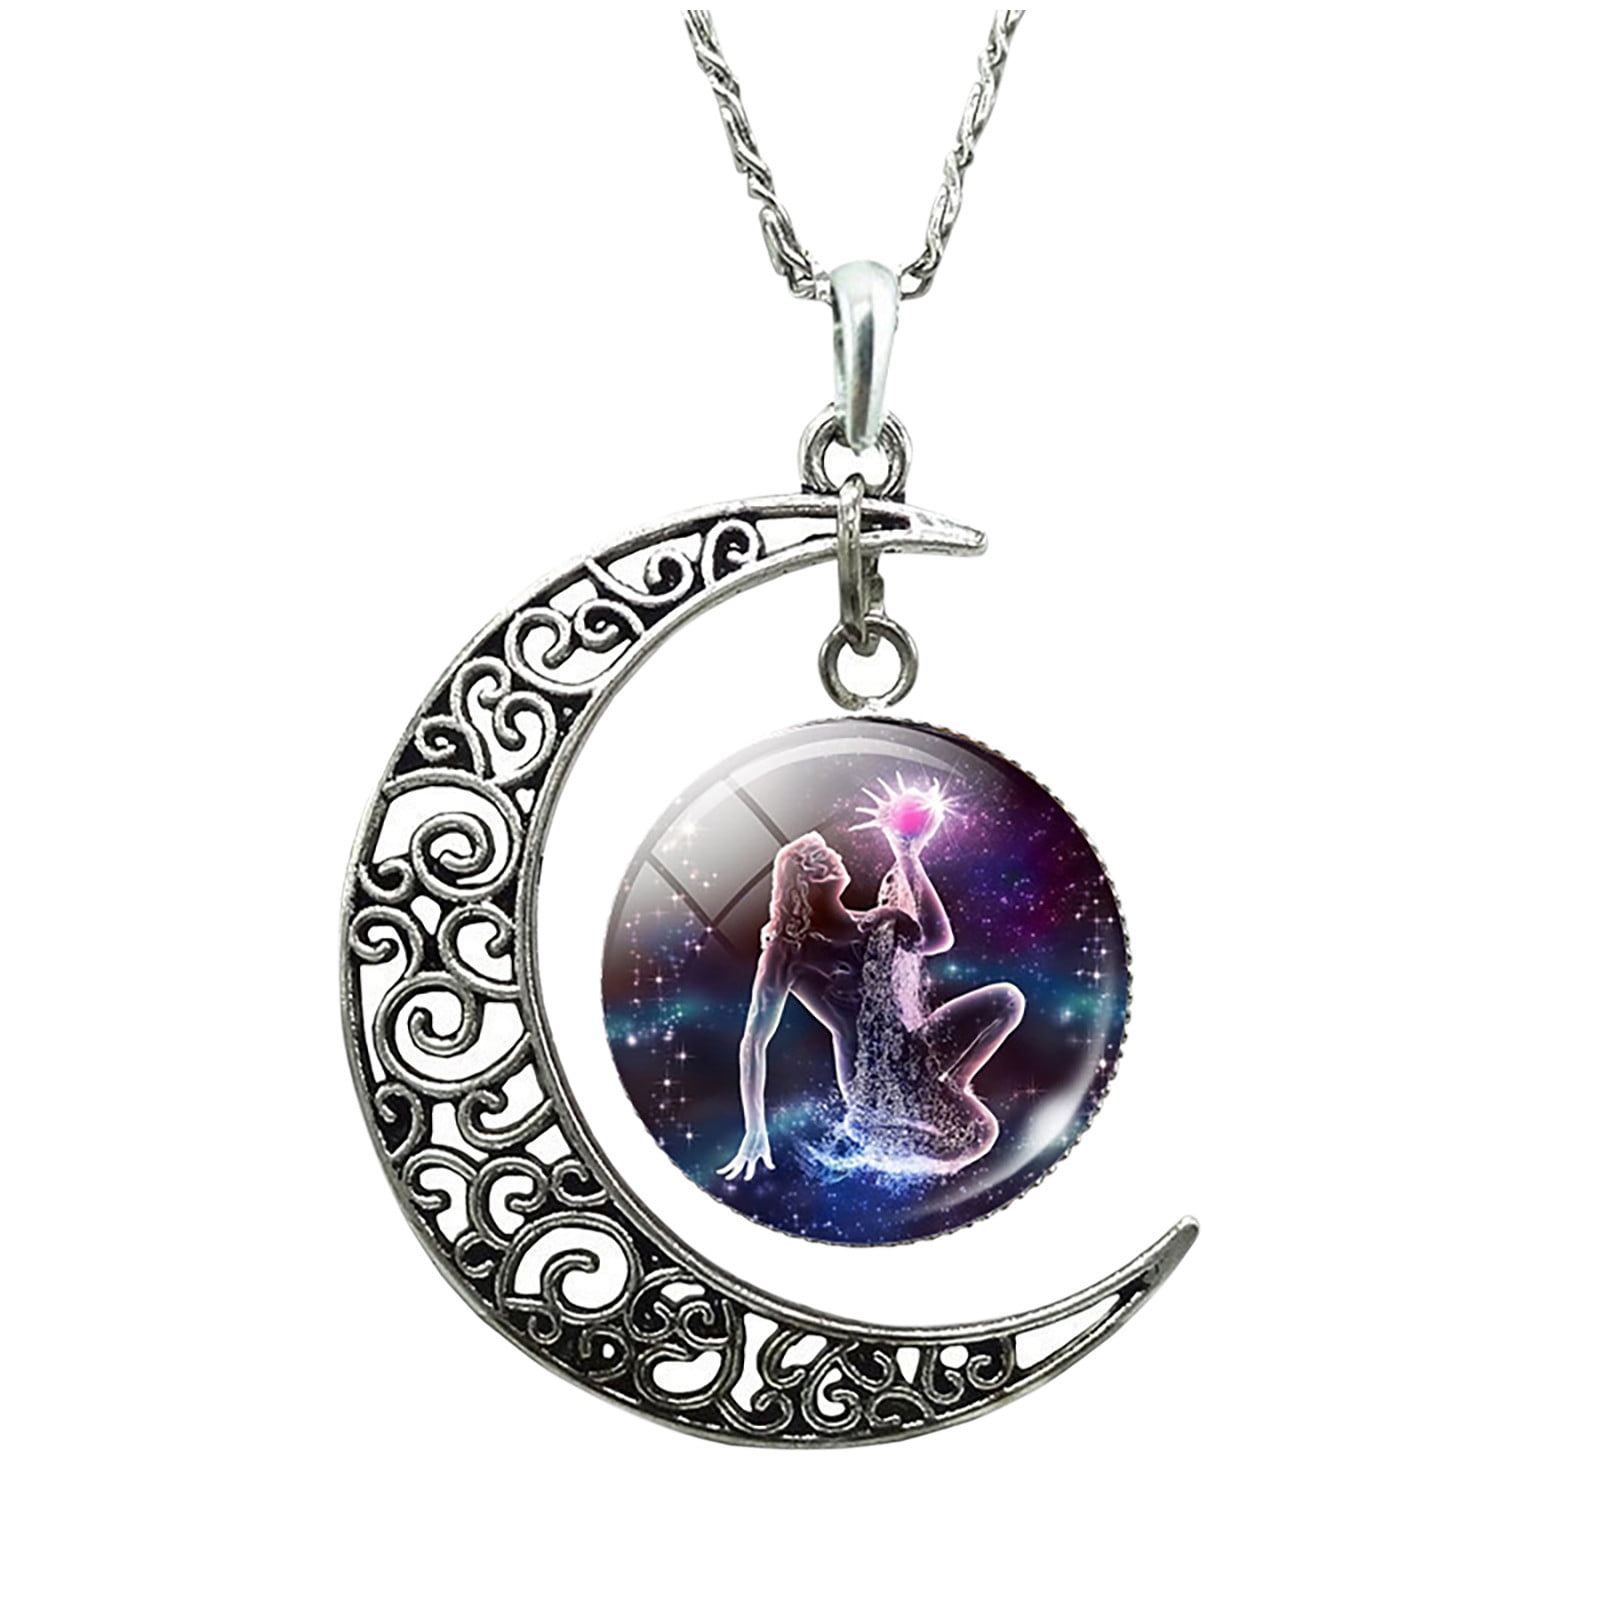 Details about   Male Triple Goddess Pentacle Pendant Stainless Steel  Crescent Moon  Necklace 